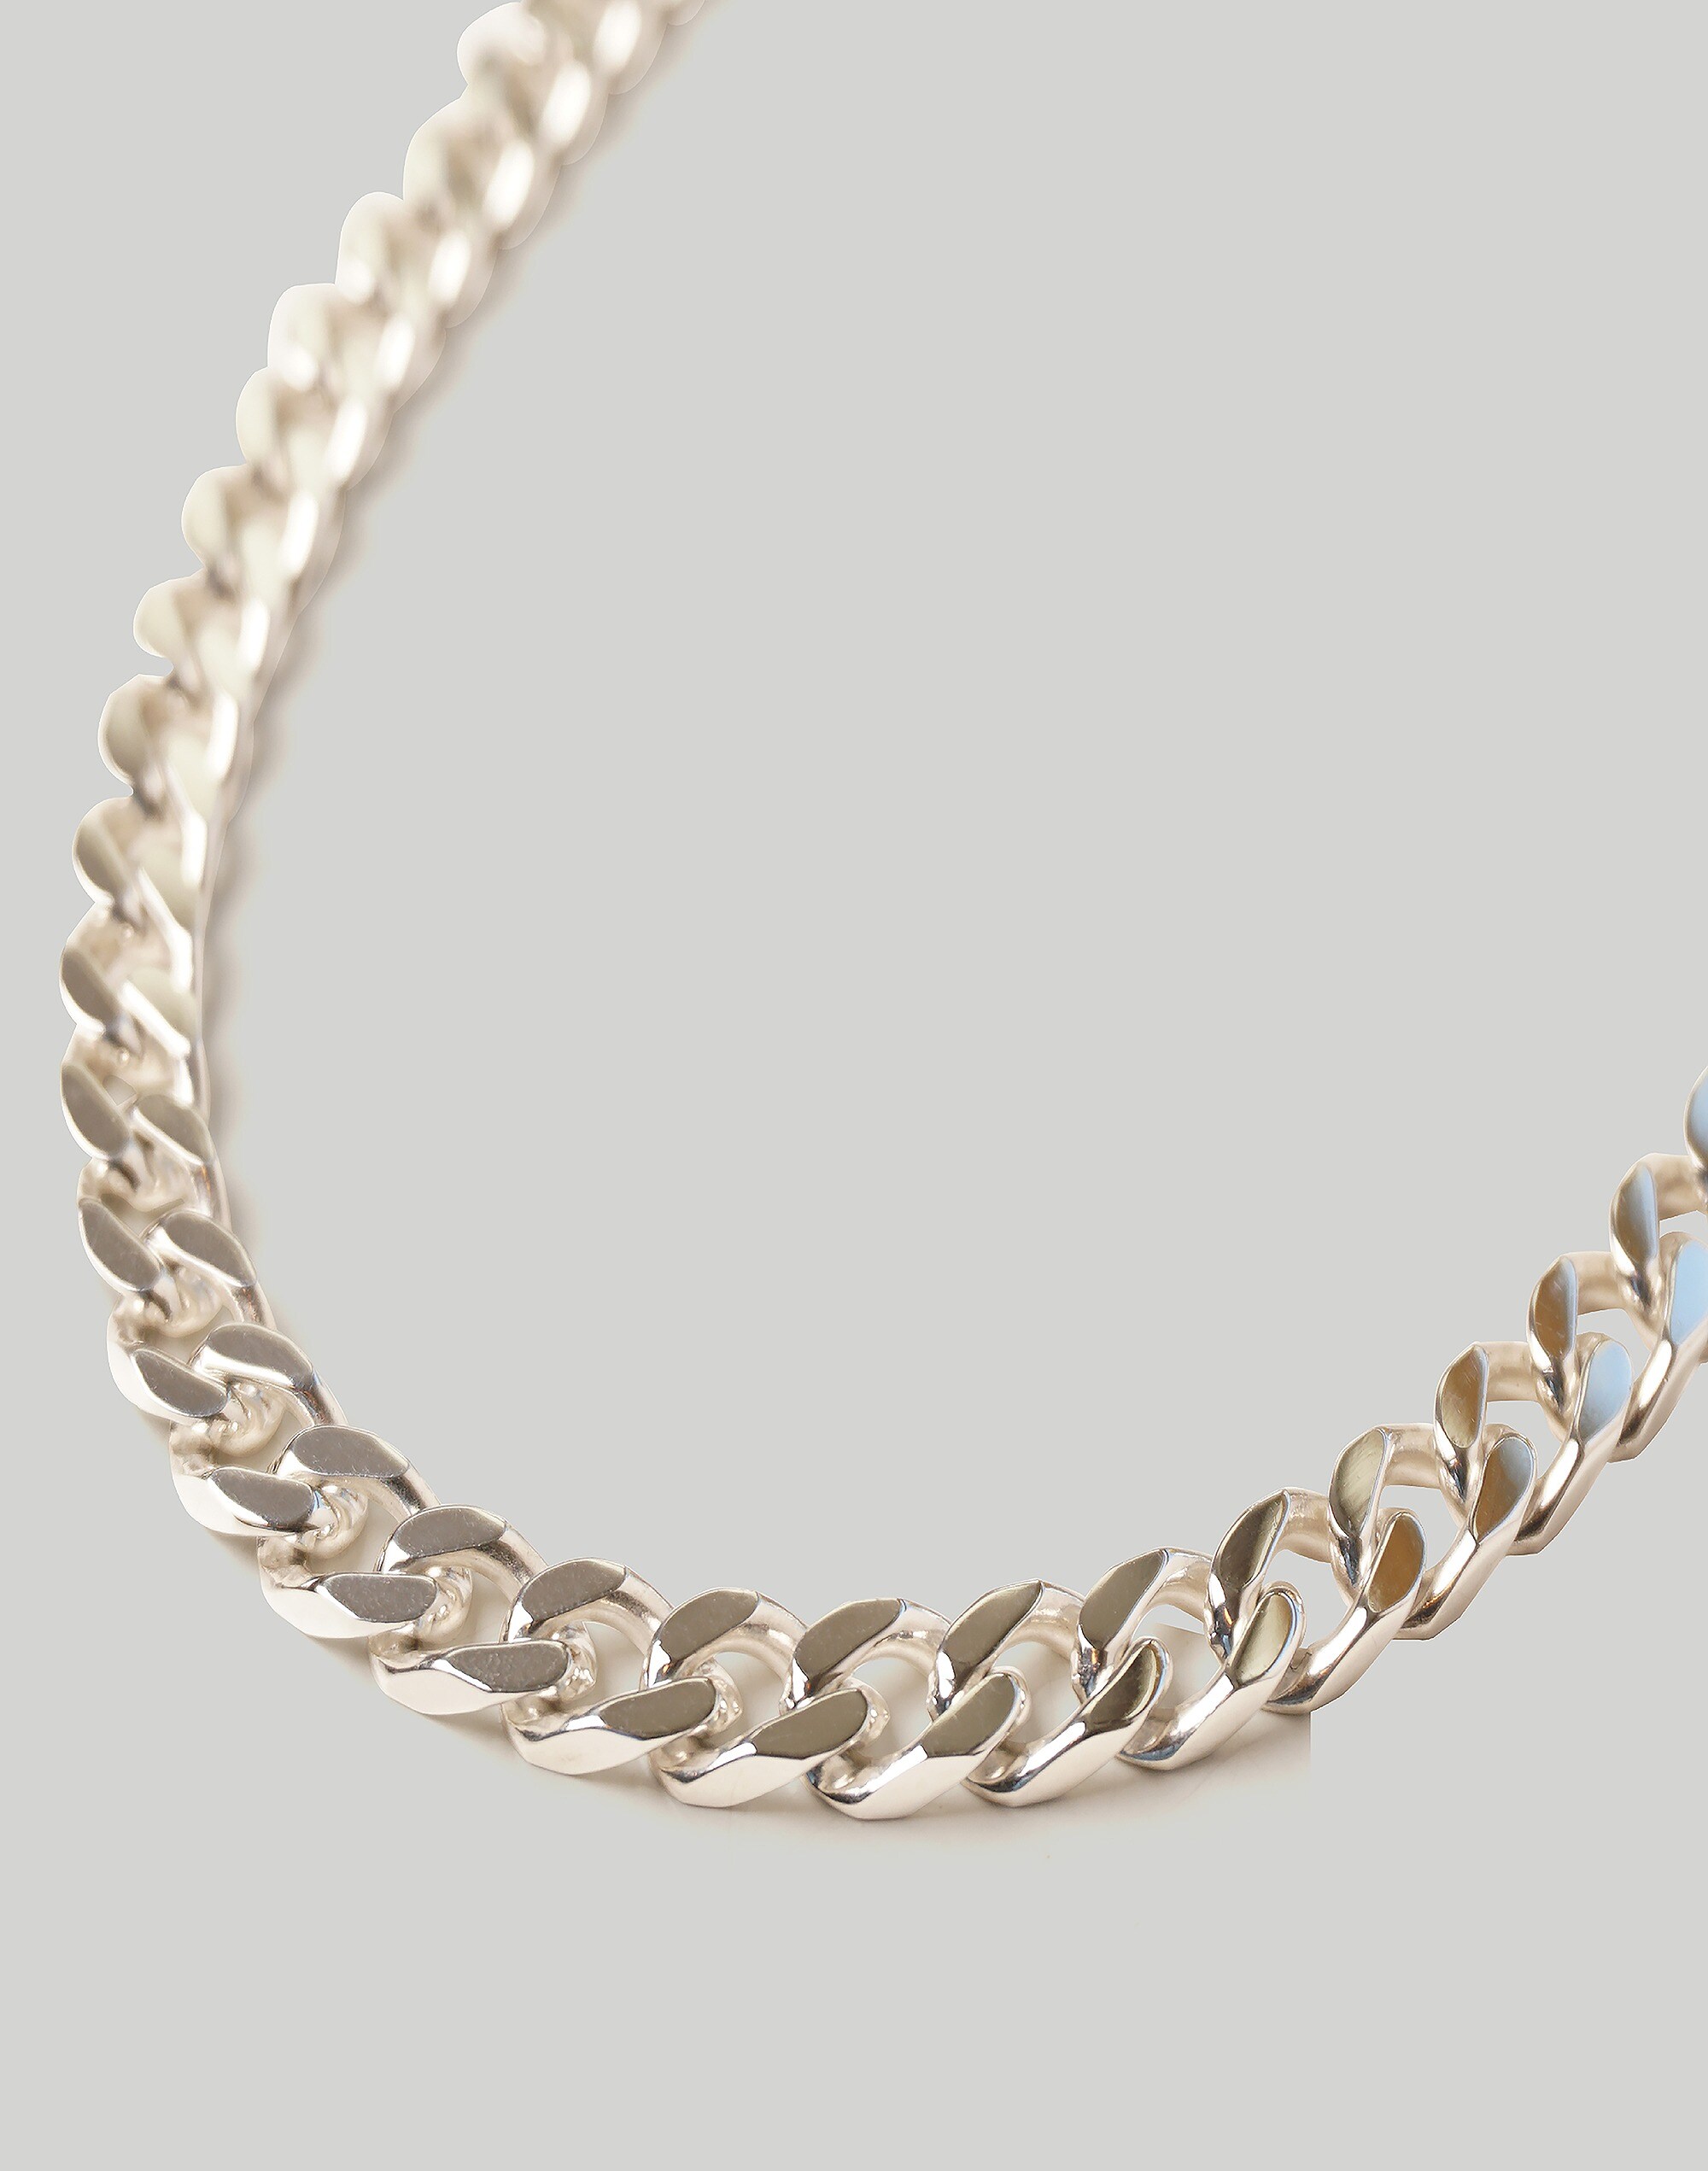 CHARLOTTE CAUWE STUDIO CURB CHAIN NECKLACE IN STERLING SILVER